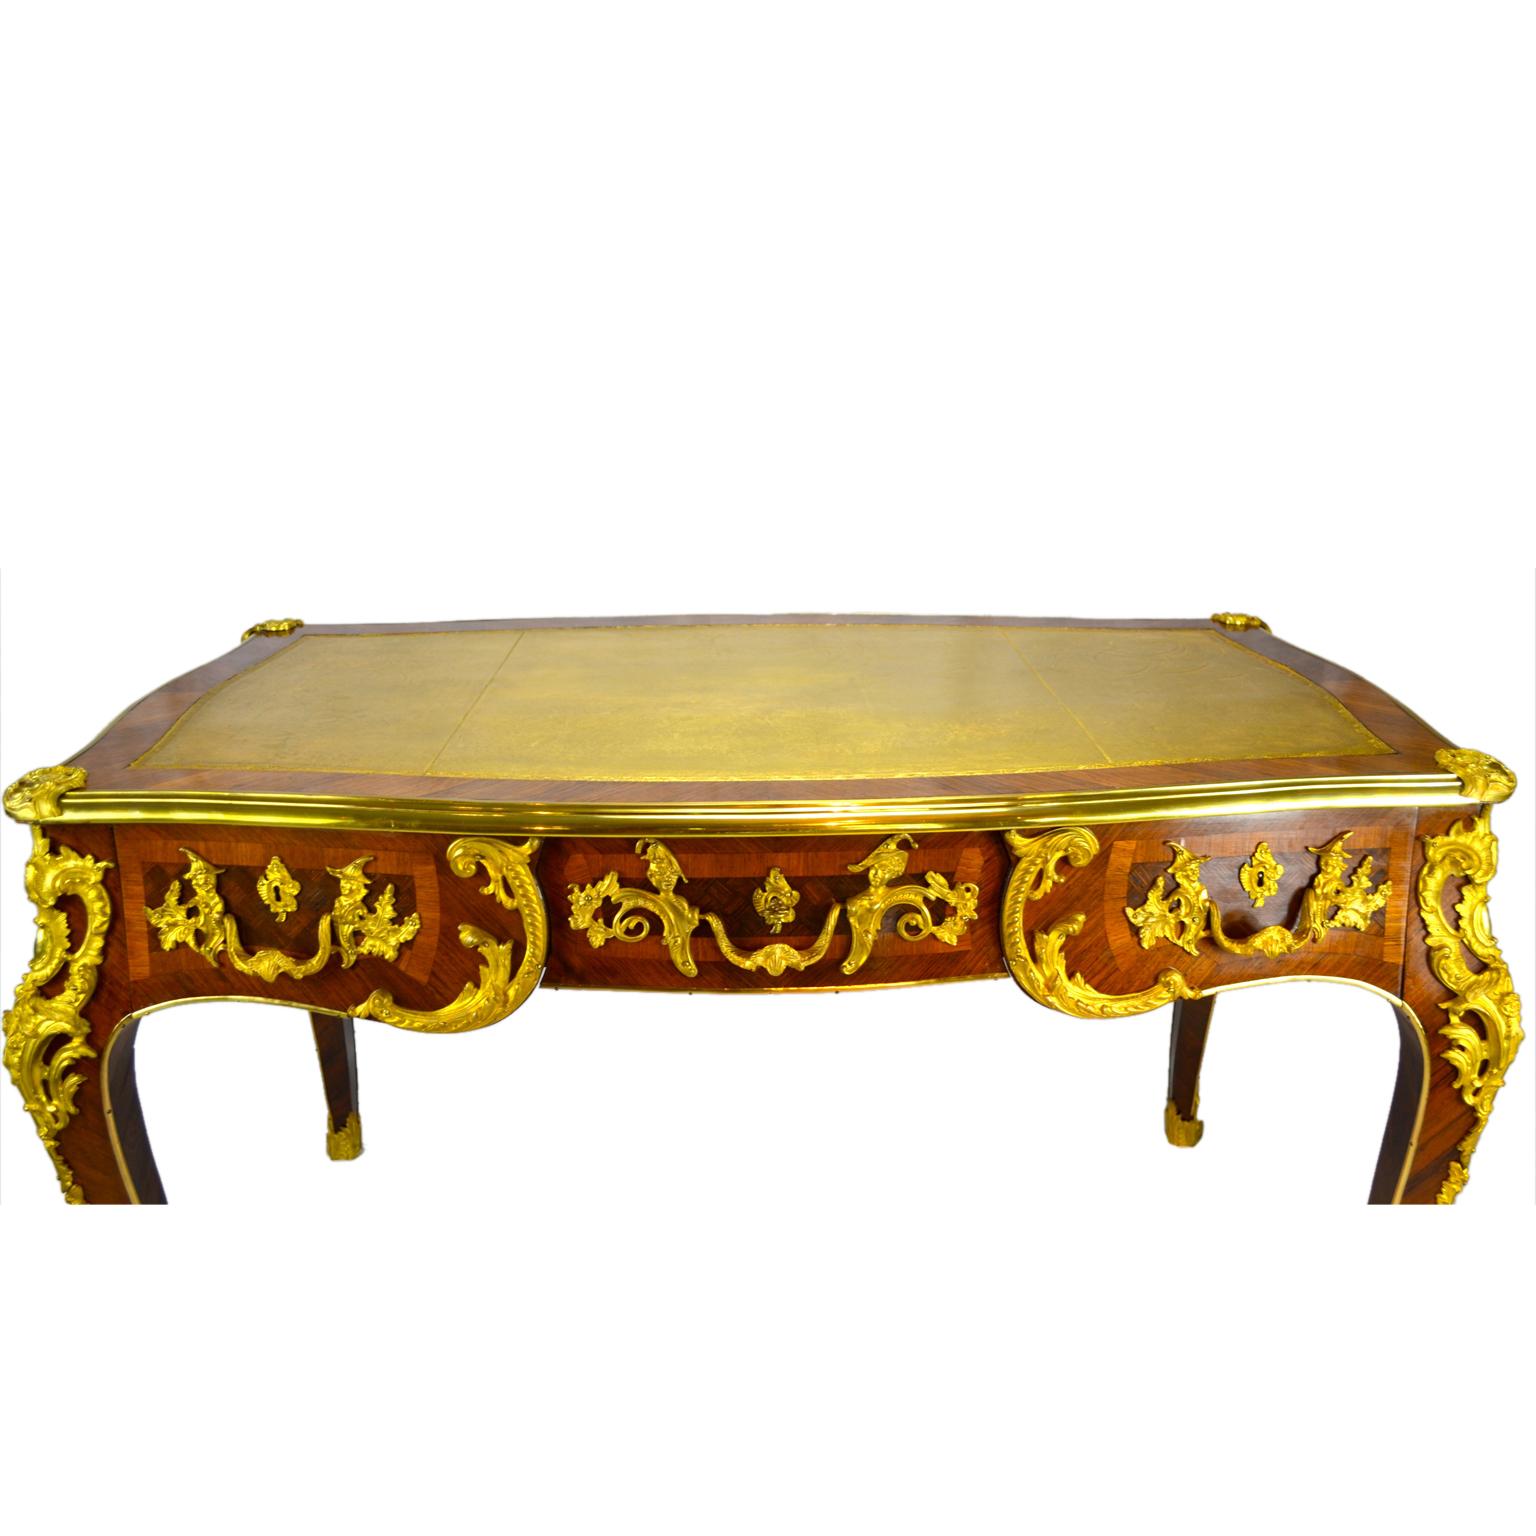 Louis XV Style French Kingwood Parquetry and Gilt Bronze Bureau Plat 'Desk' For Sale 2